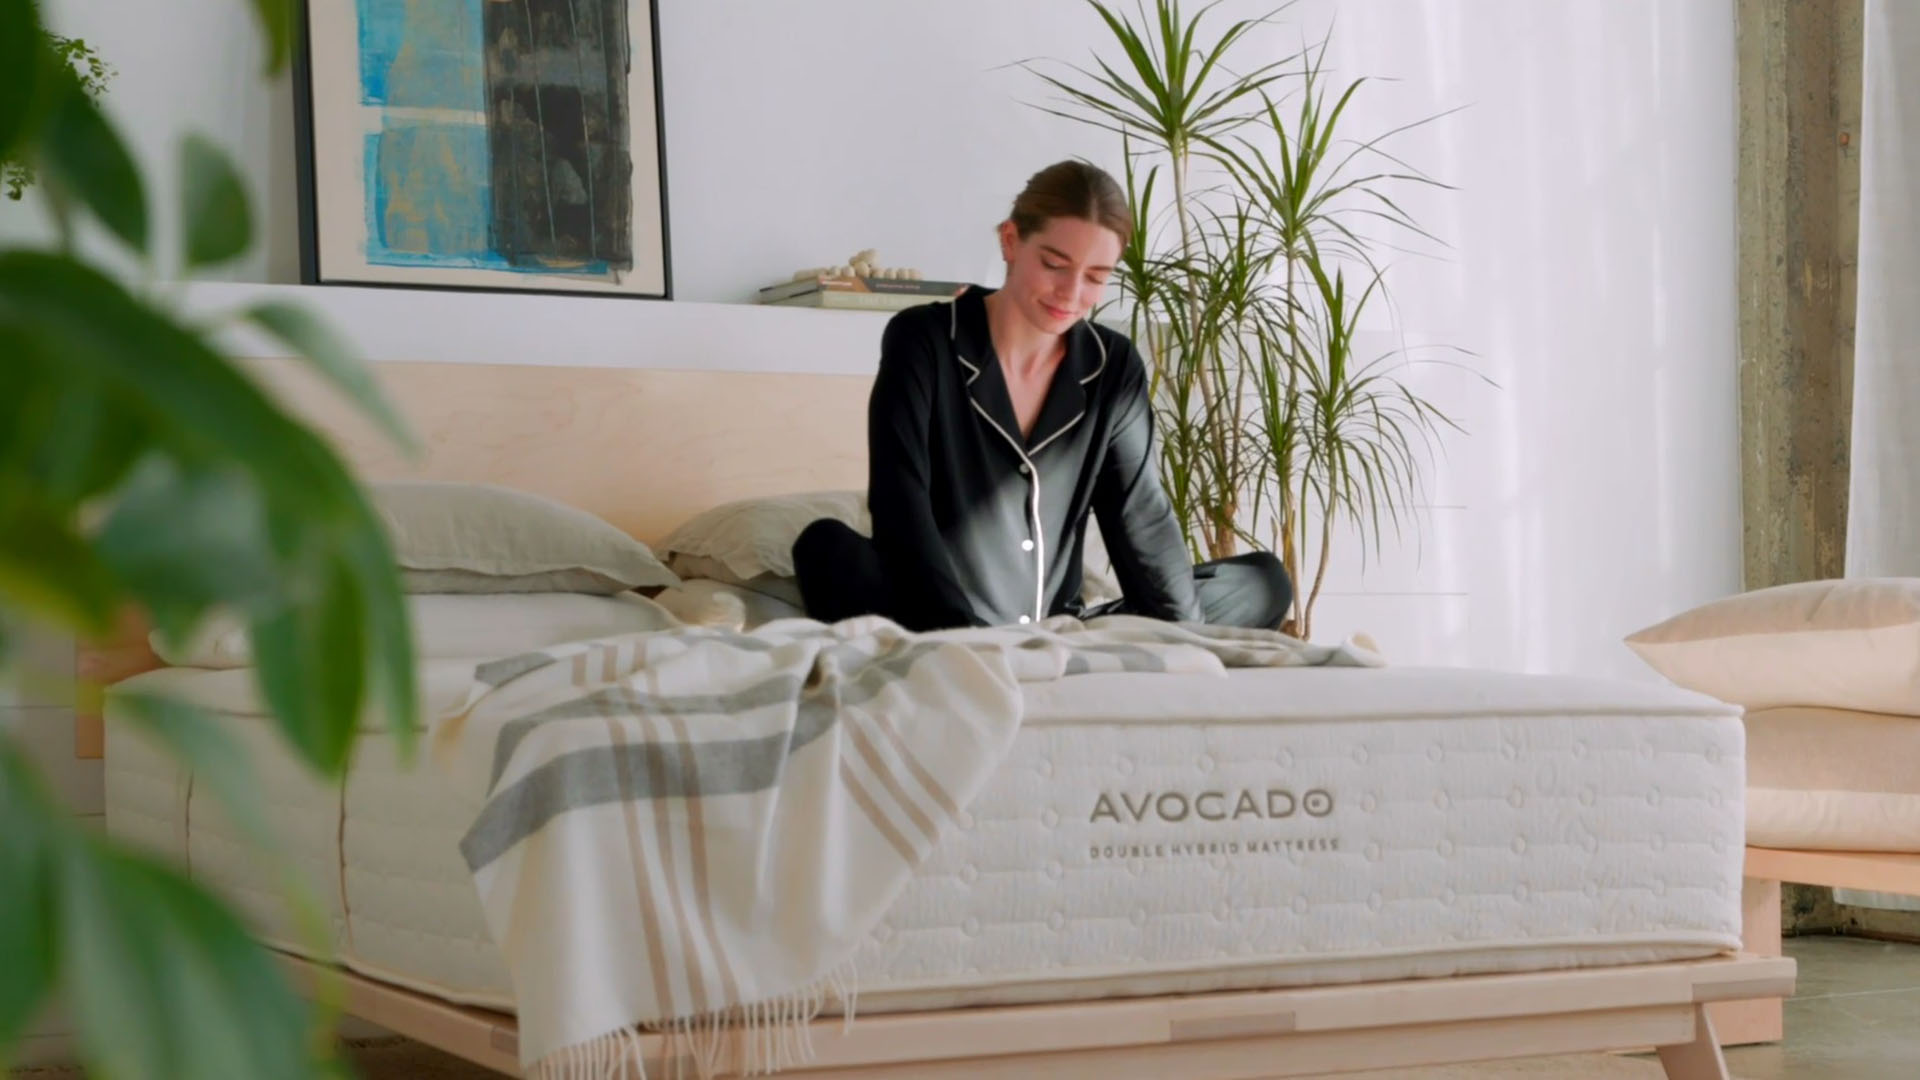 Where to buy Avocado Mattress in Newhall, California